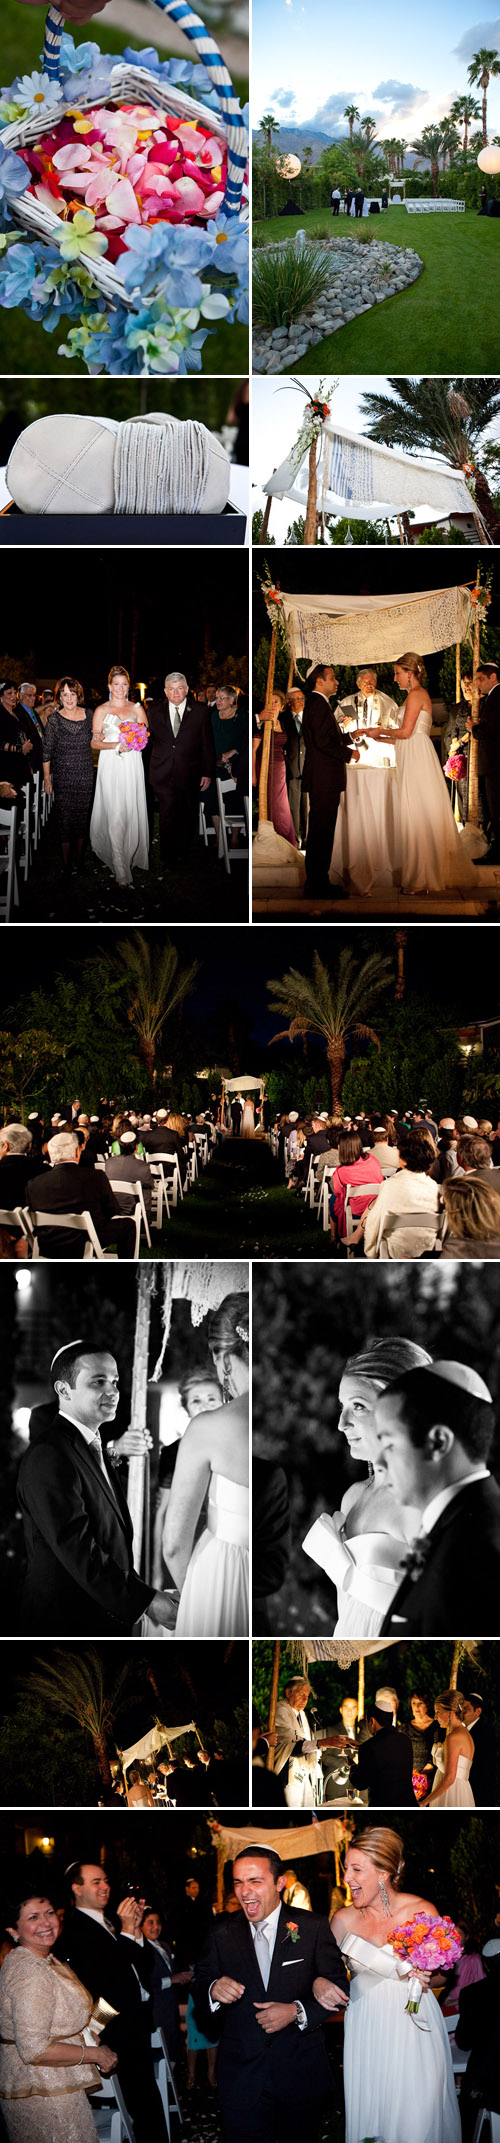 Palm Springs real wedding at Hotel Riviera, photos by Mary McHenry Photography